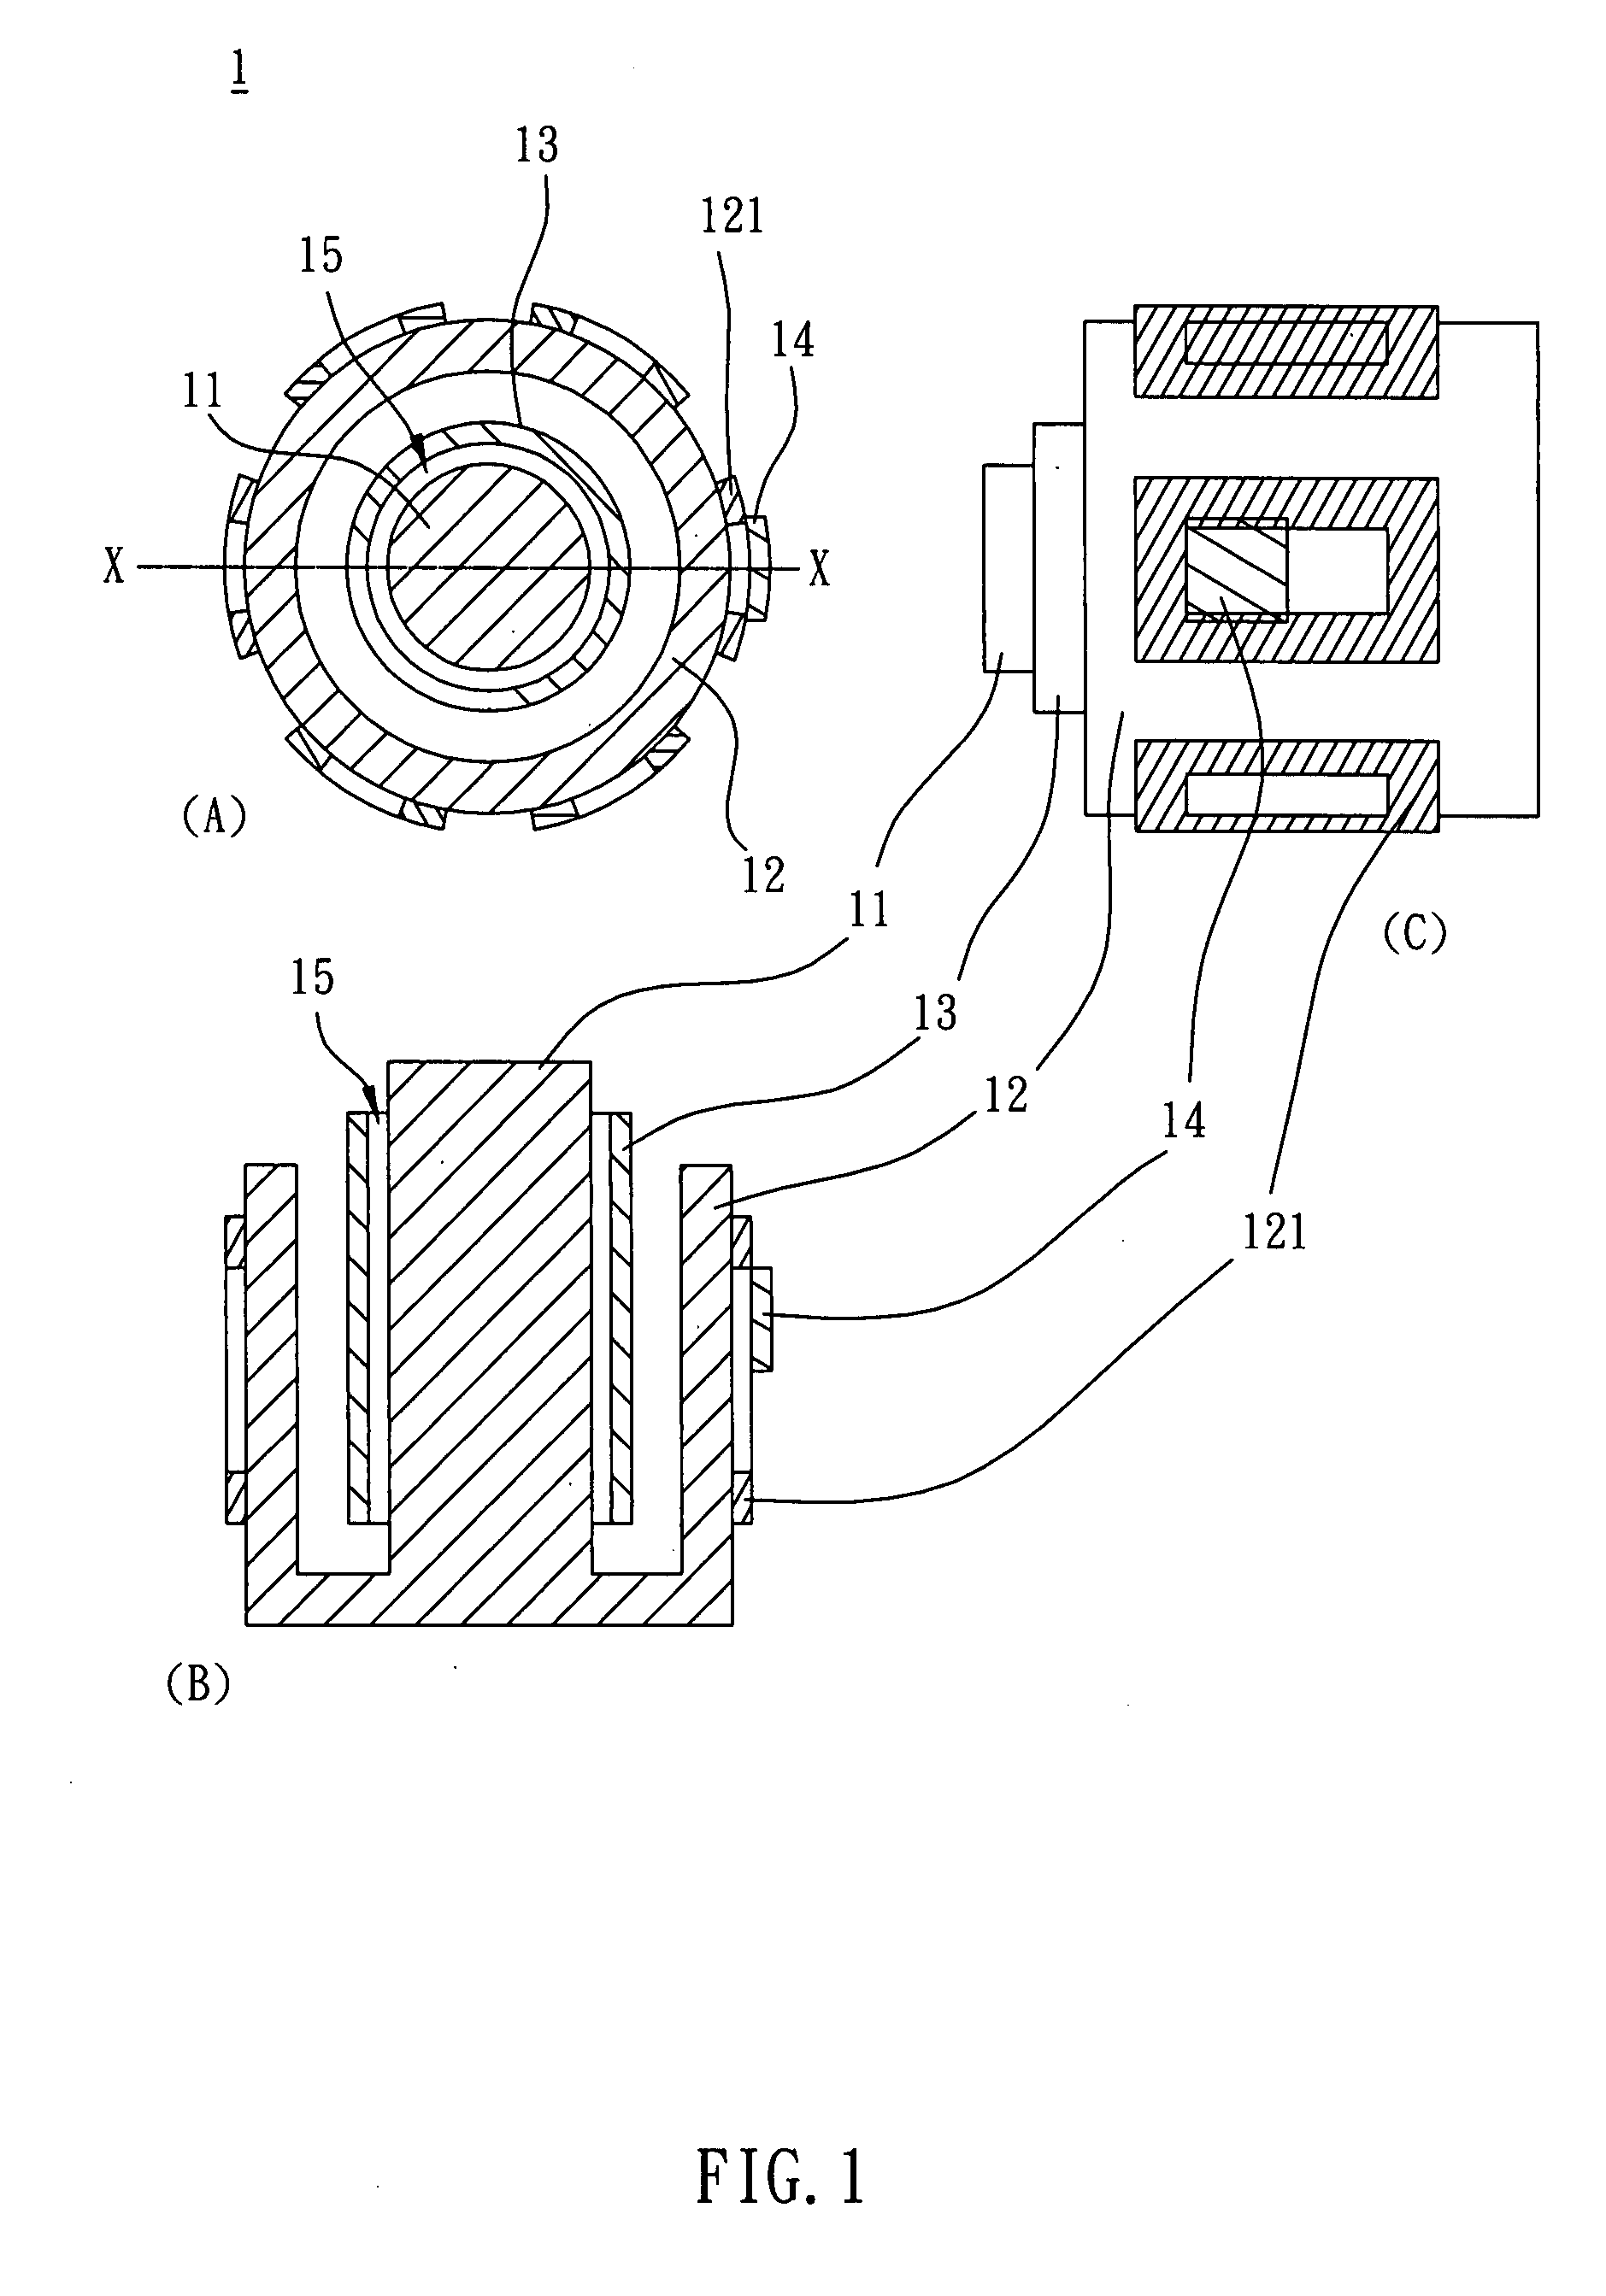 Motor with air bearing structure